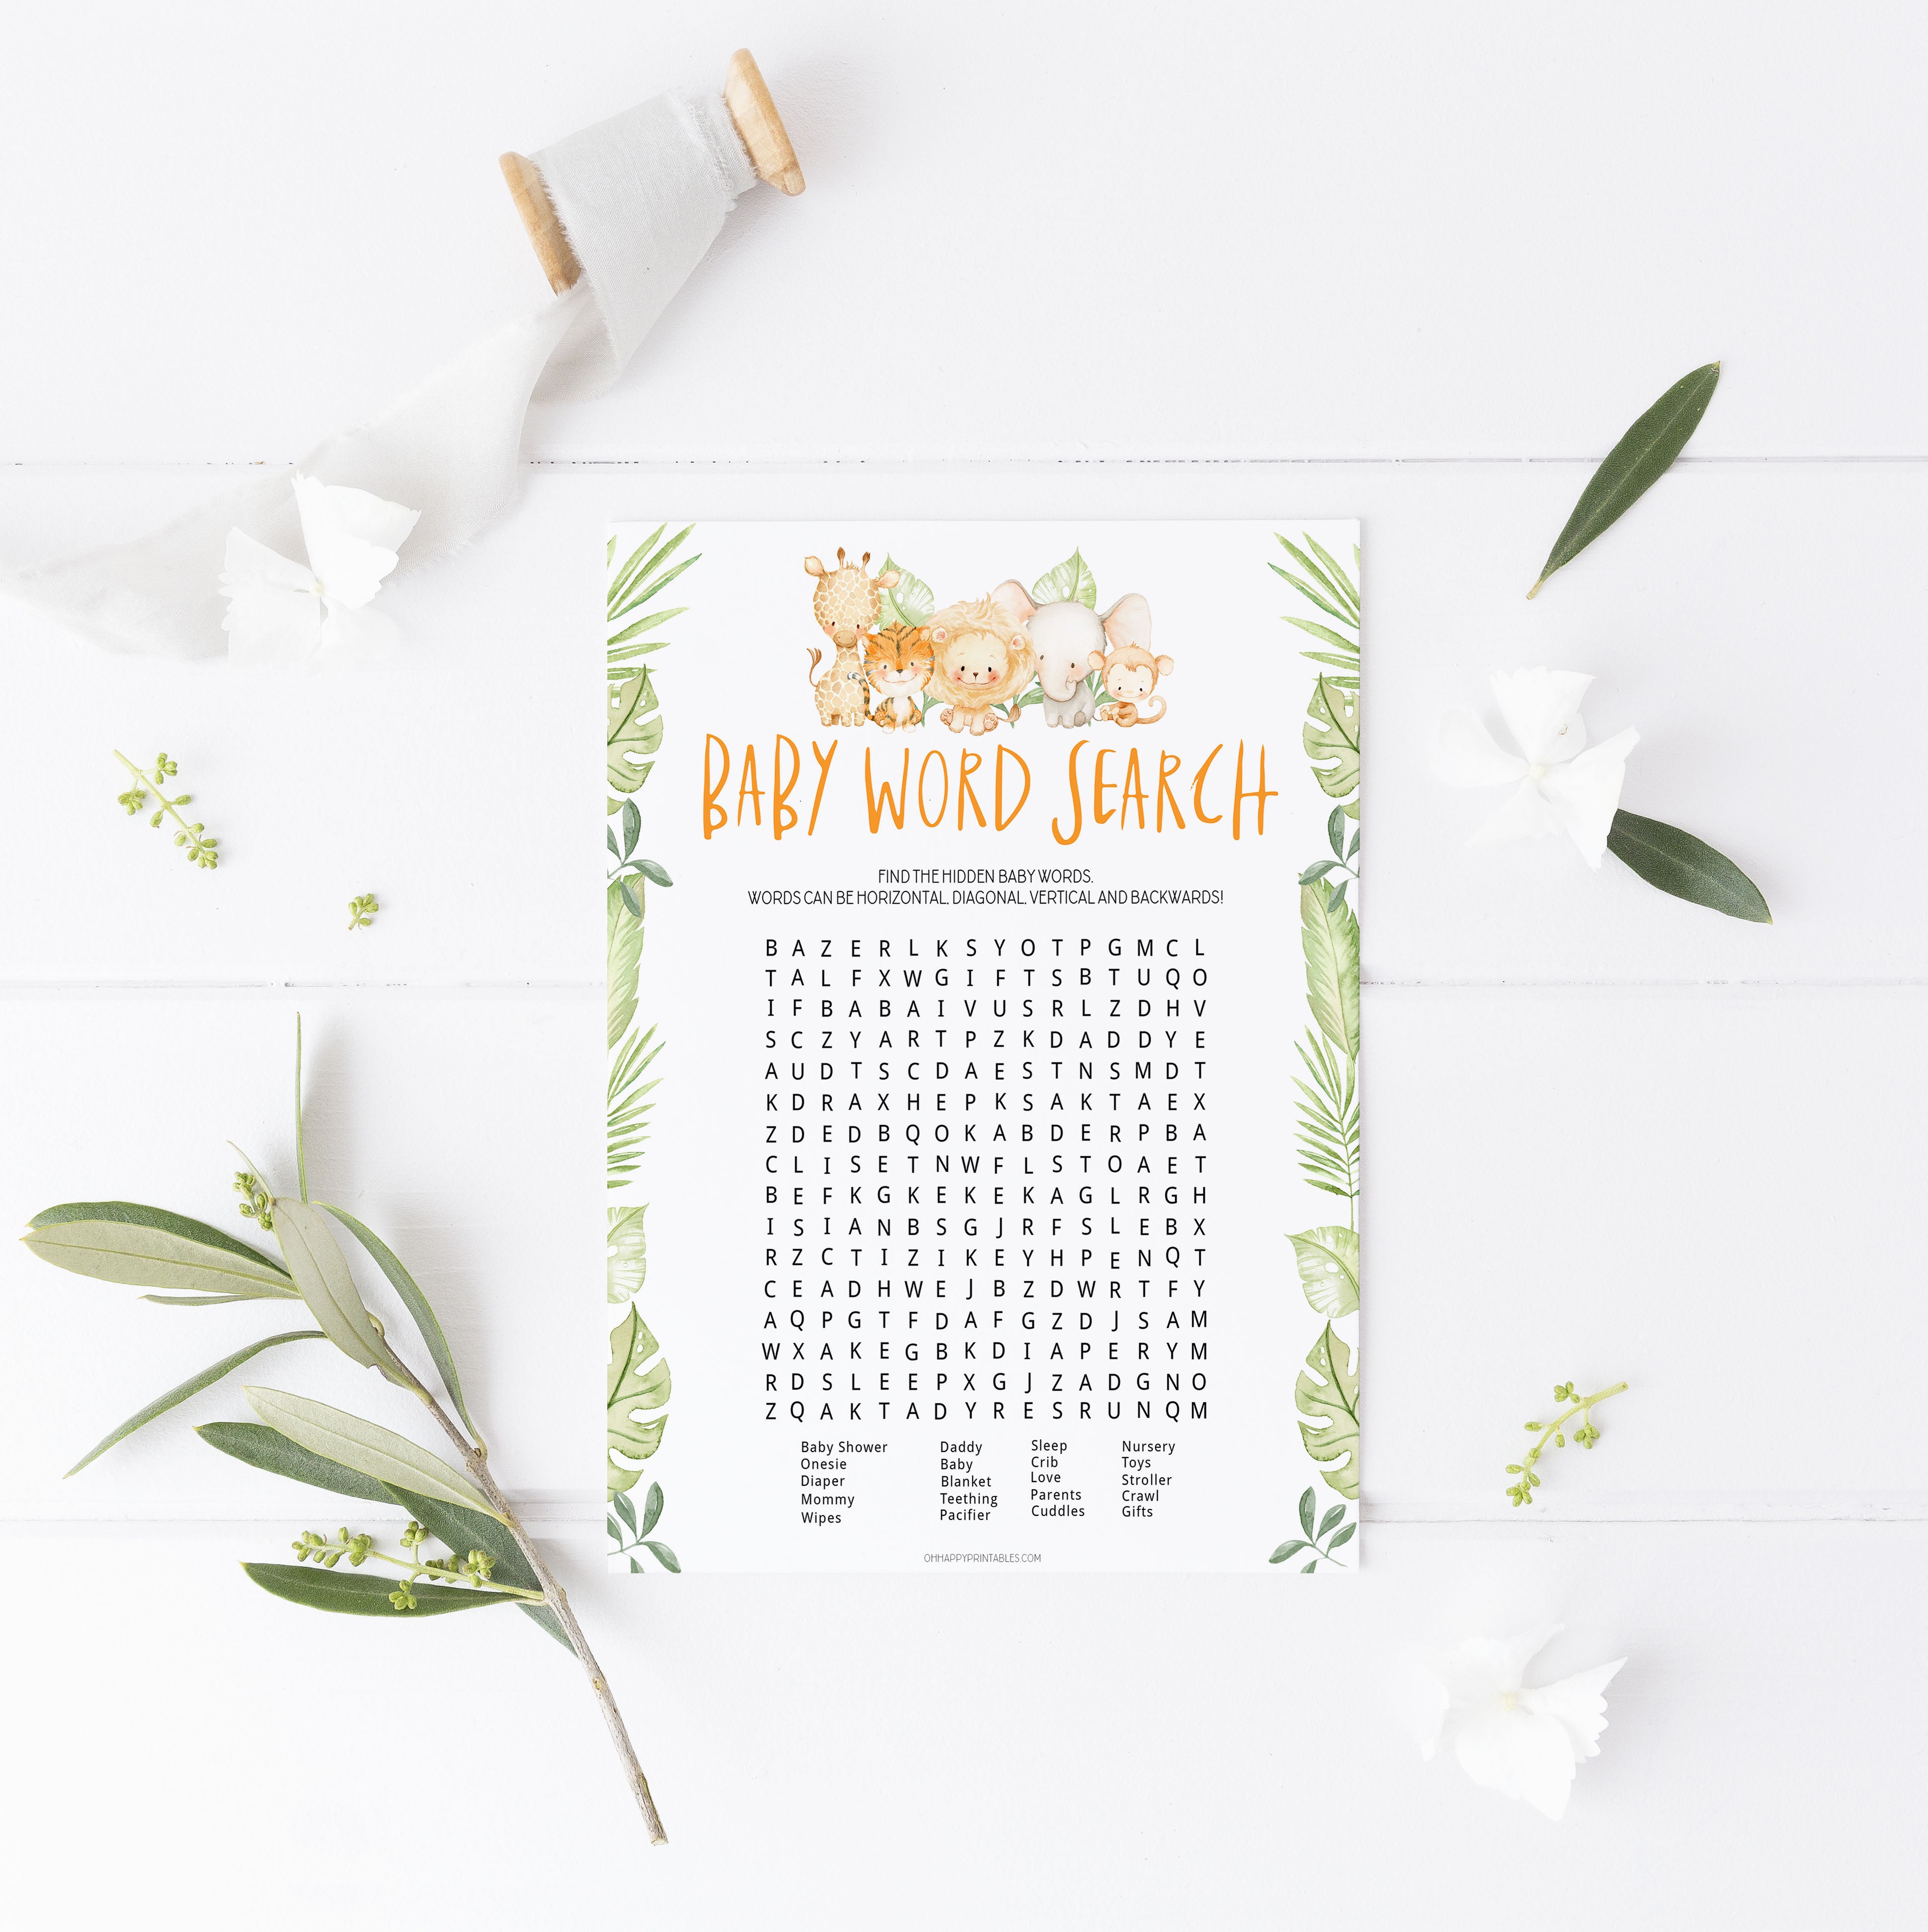 baby shower word search game, baby word search, Printable baby shower games, safari animals baby games, baby shower games, fun baby shower ideas, top baby shower ideas, safari animals baby shower, baby shower games, fun baby shower ideas